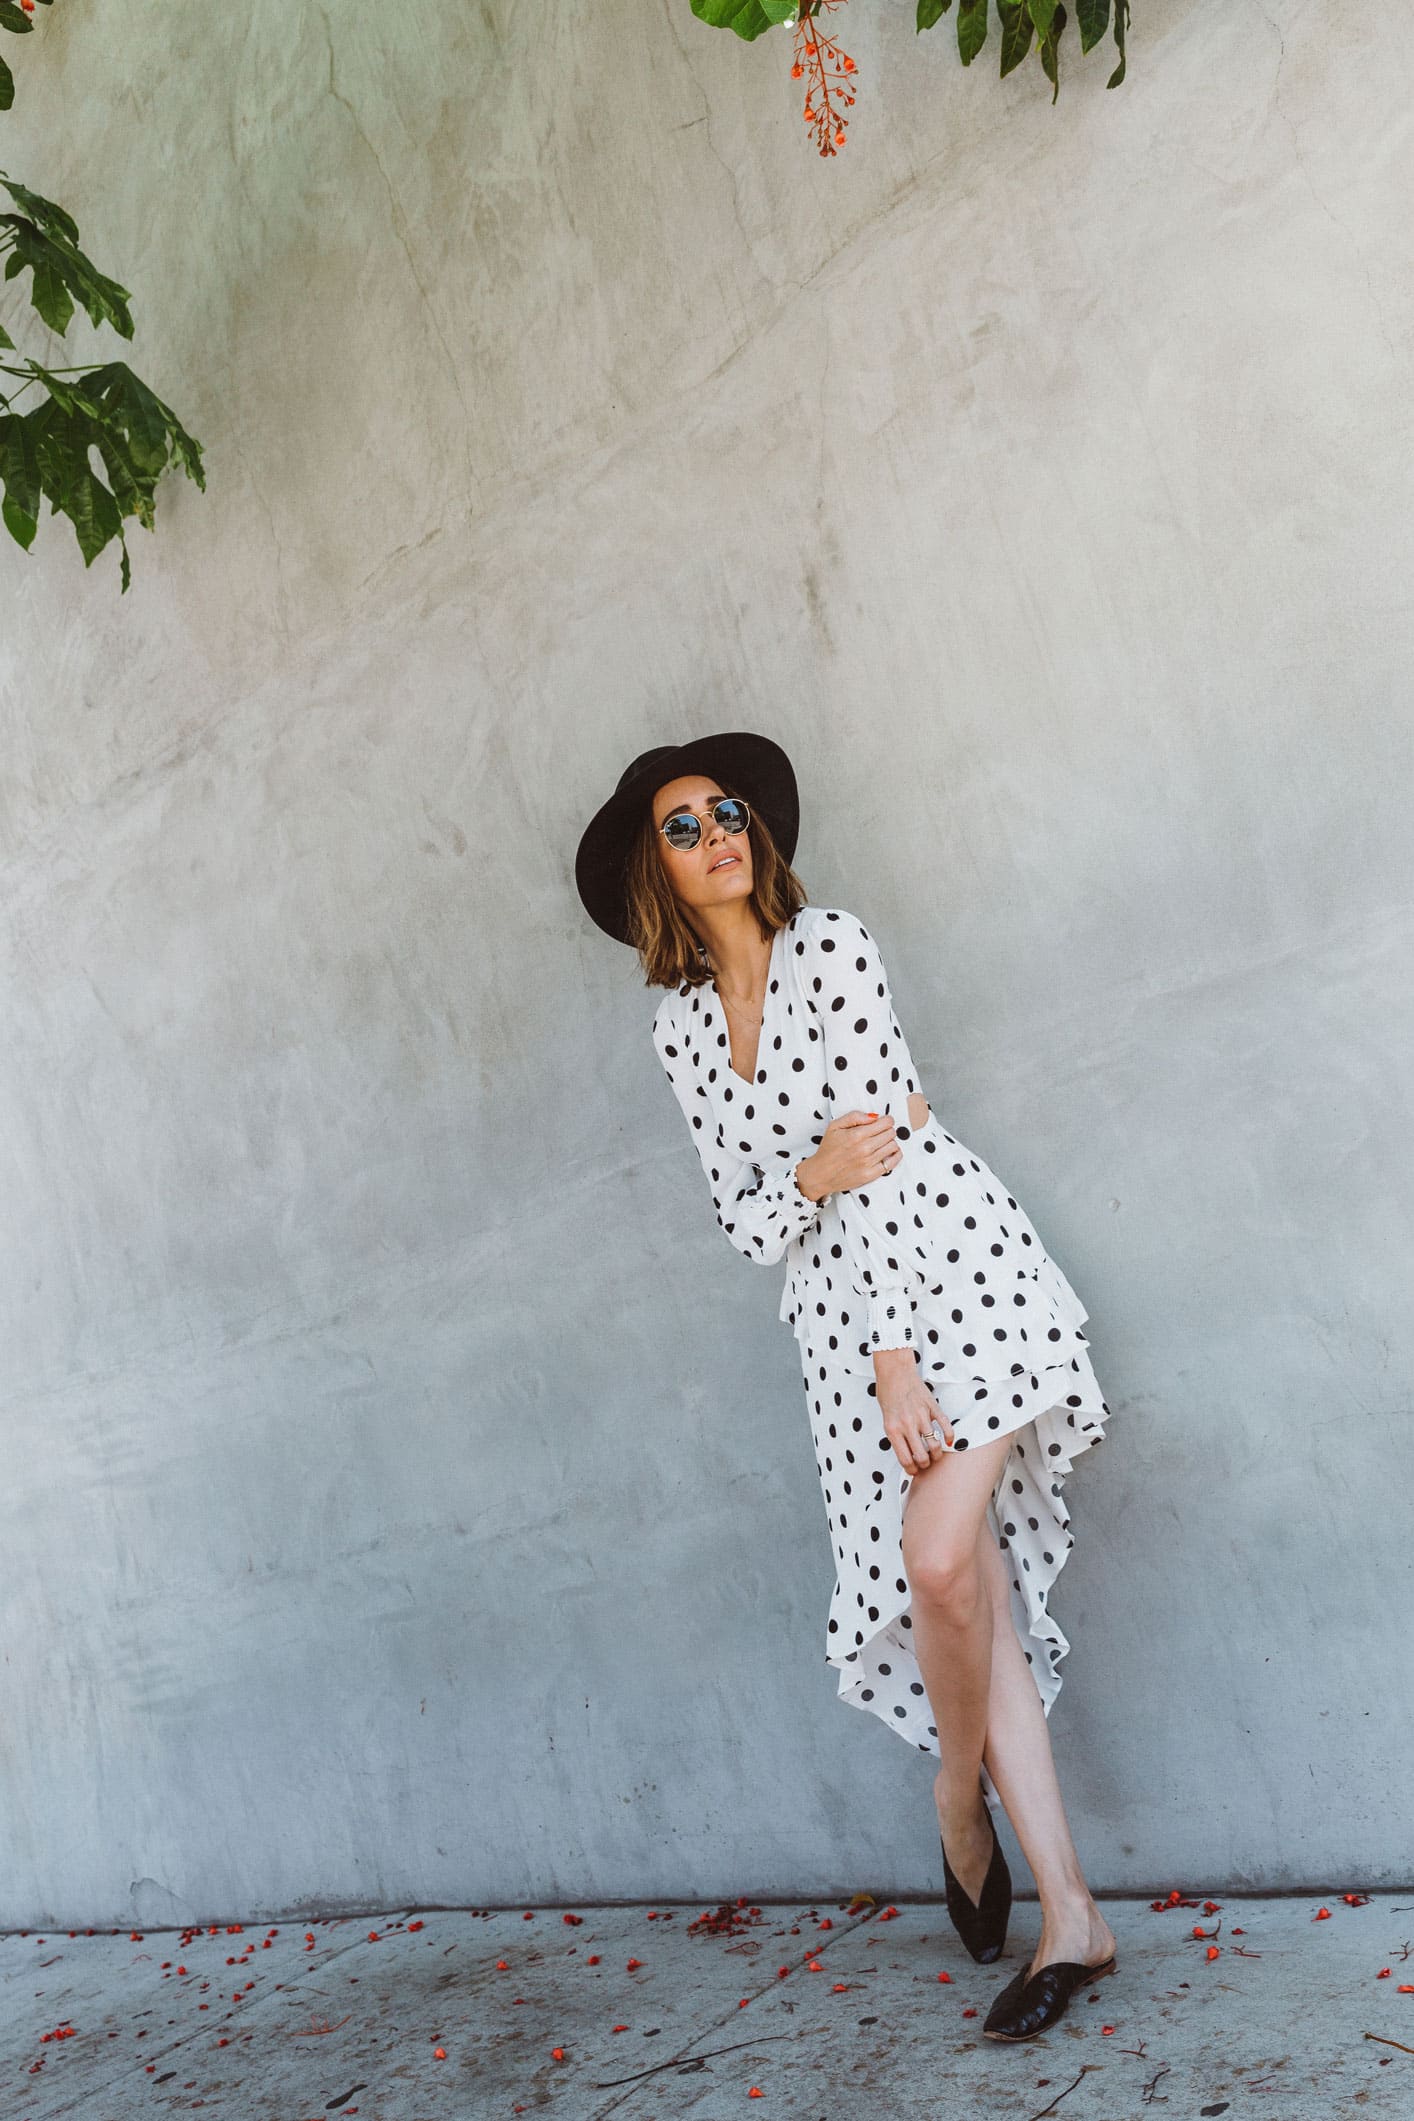 Louise Roe wearing summer polka dot dress and leather mules